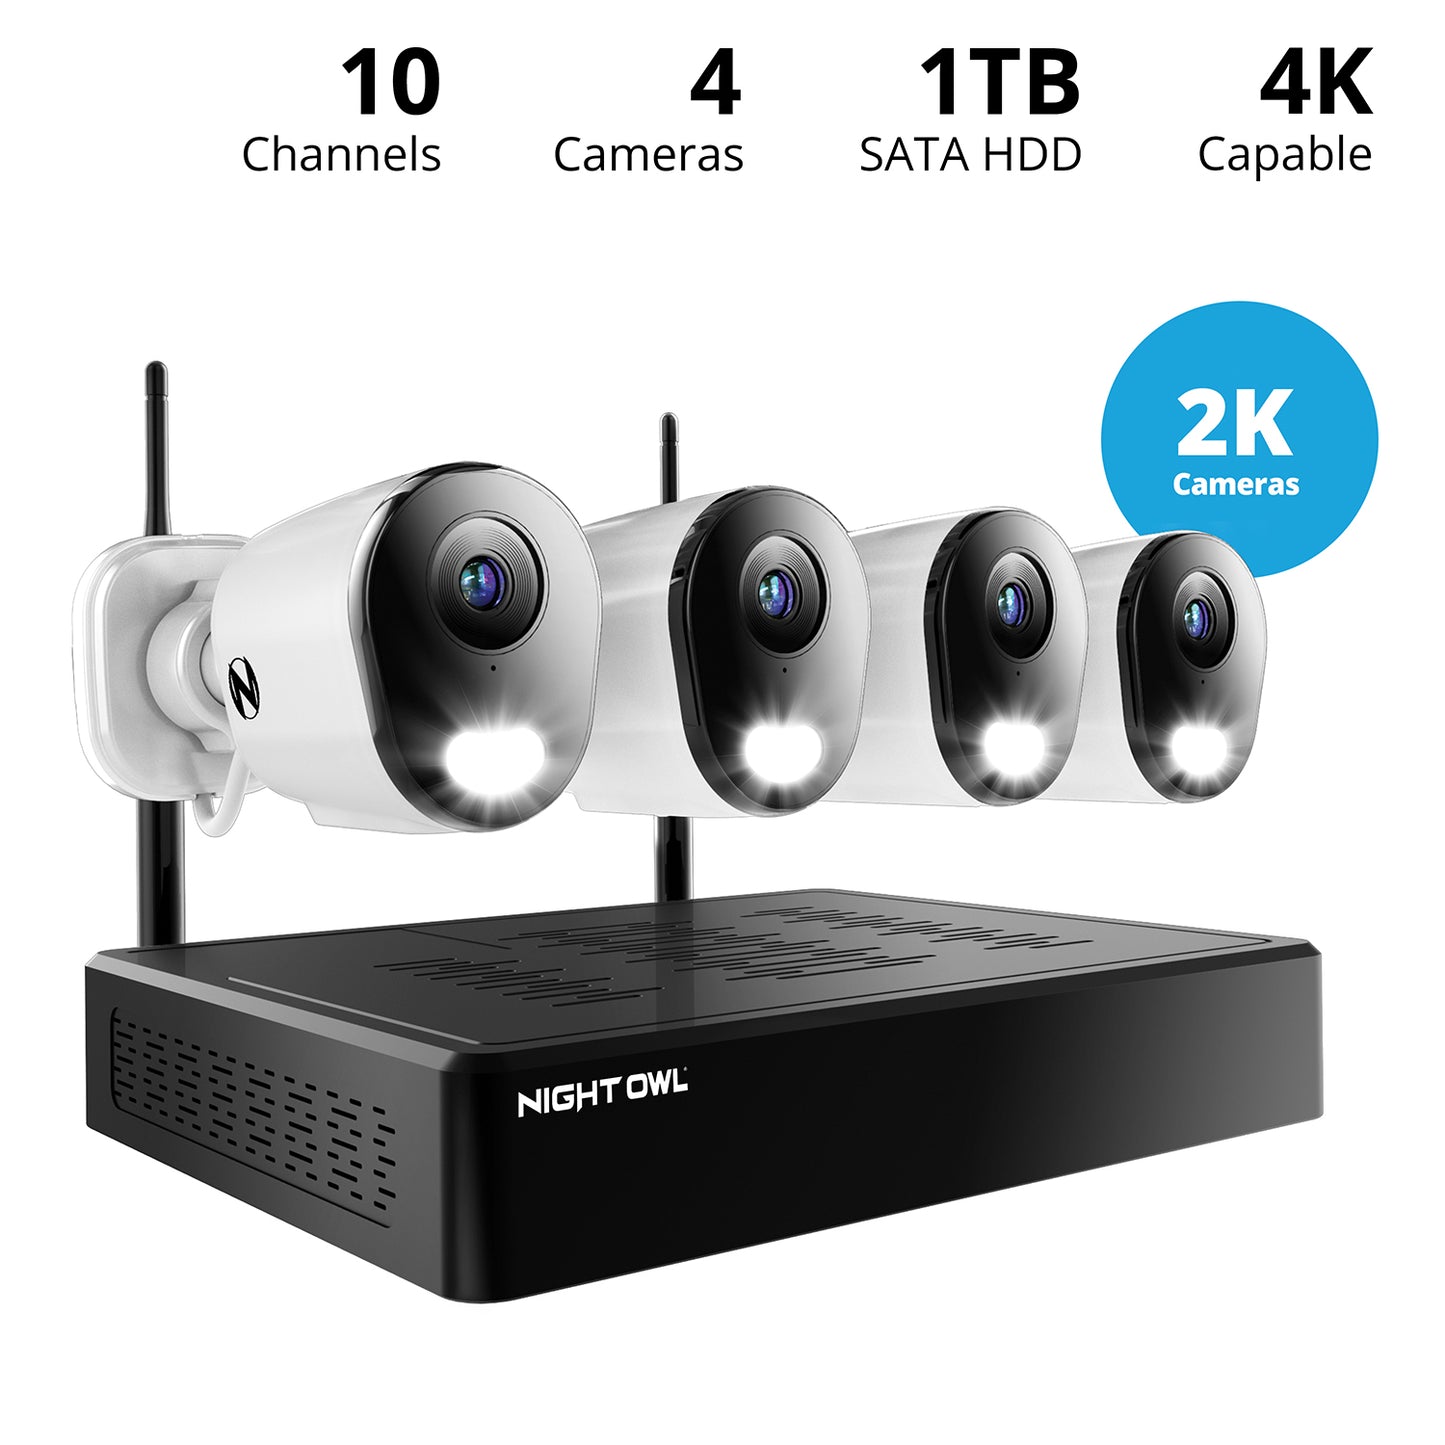 10 Channel 4K Wi-Fi NVR Security System with 1TB Hard Drive and 4 Wi-Fi IP 2K Deterrence Cameras with 2-Way Audio